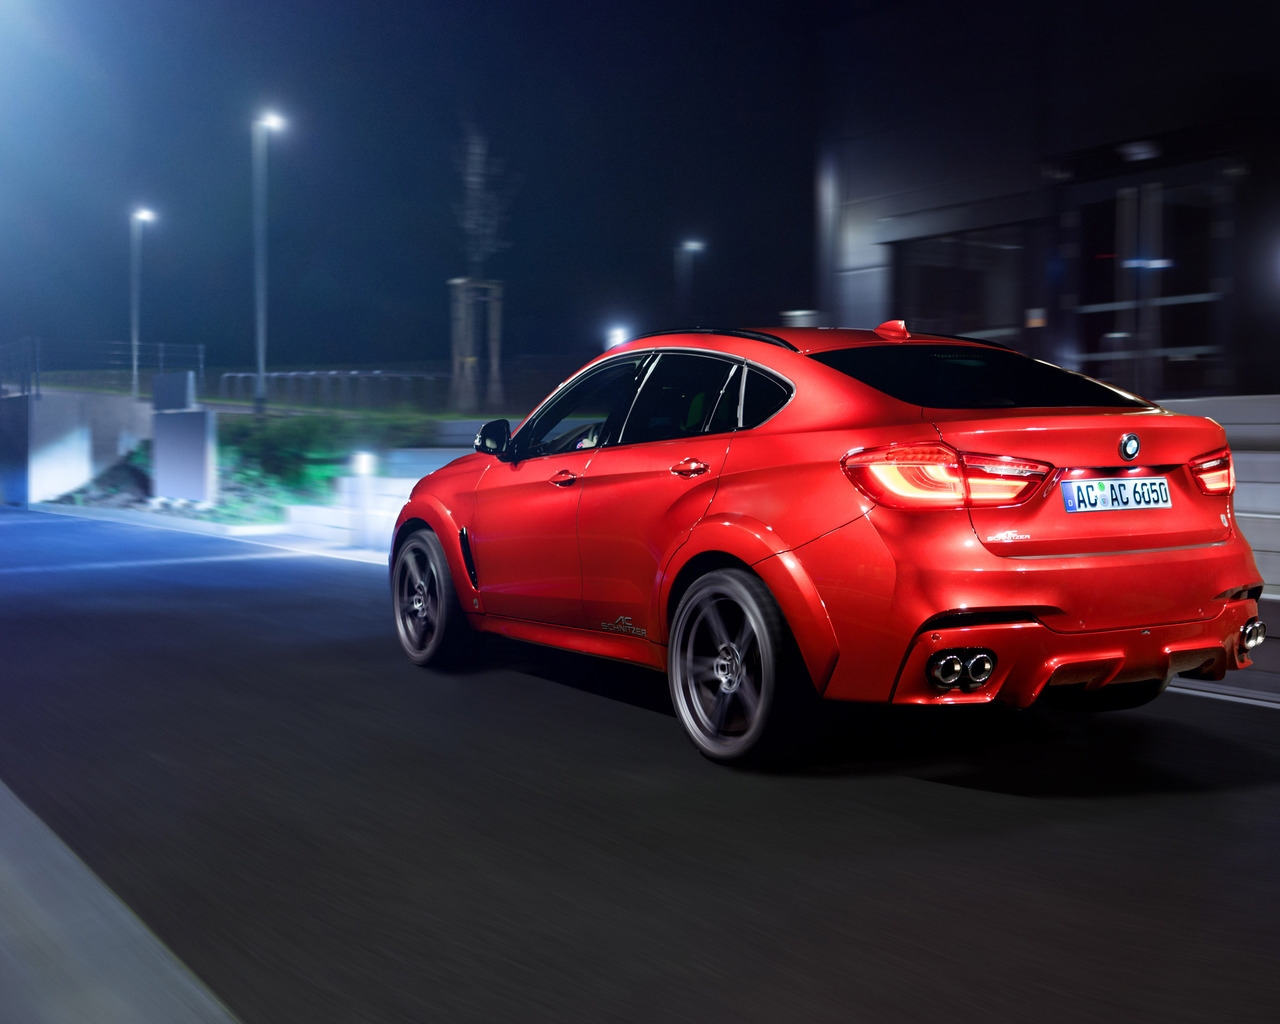 Red BMW X6 2016 for 1280 x 1024 resolution